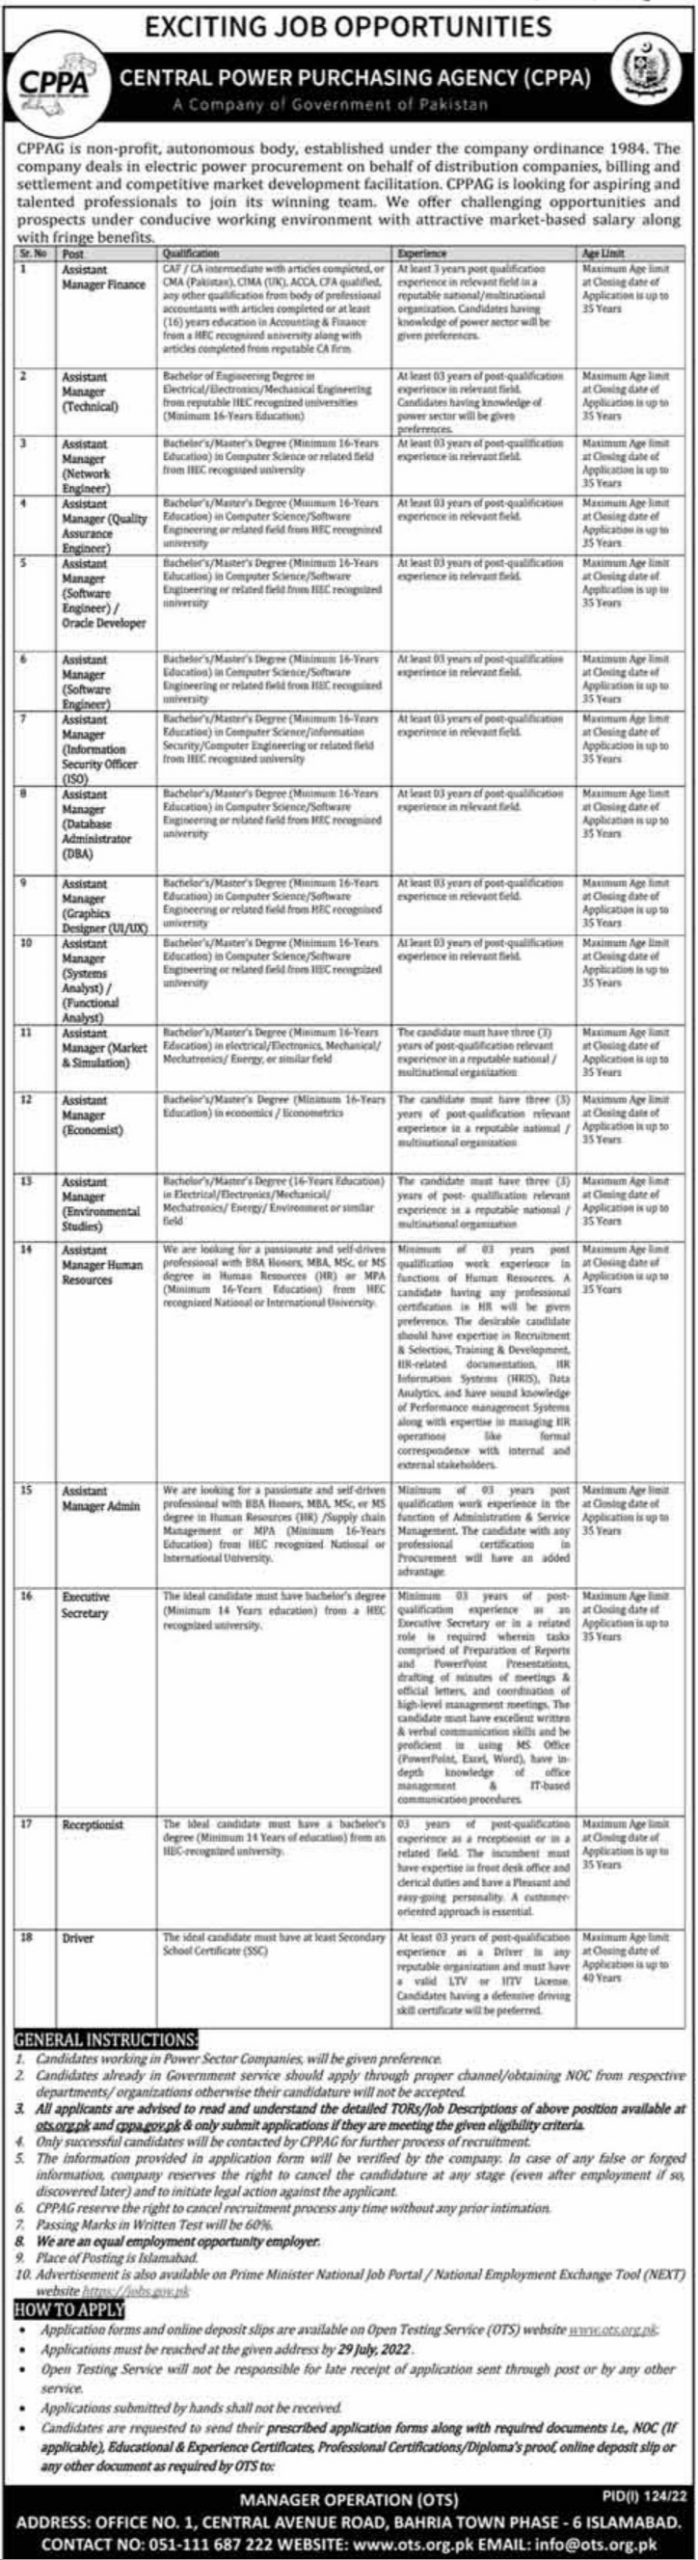 Latest Govt Jobs In Pakistan 2022 At Central Power Purchasing Agency 2022